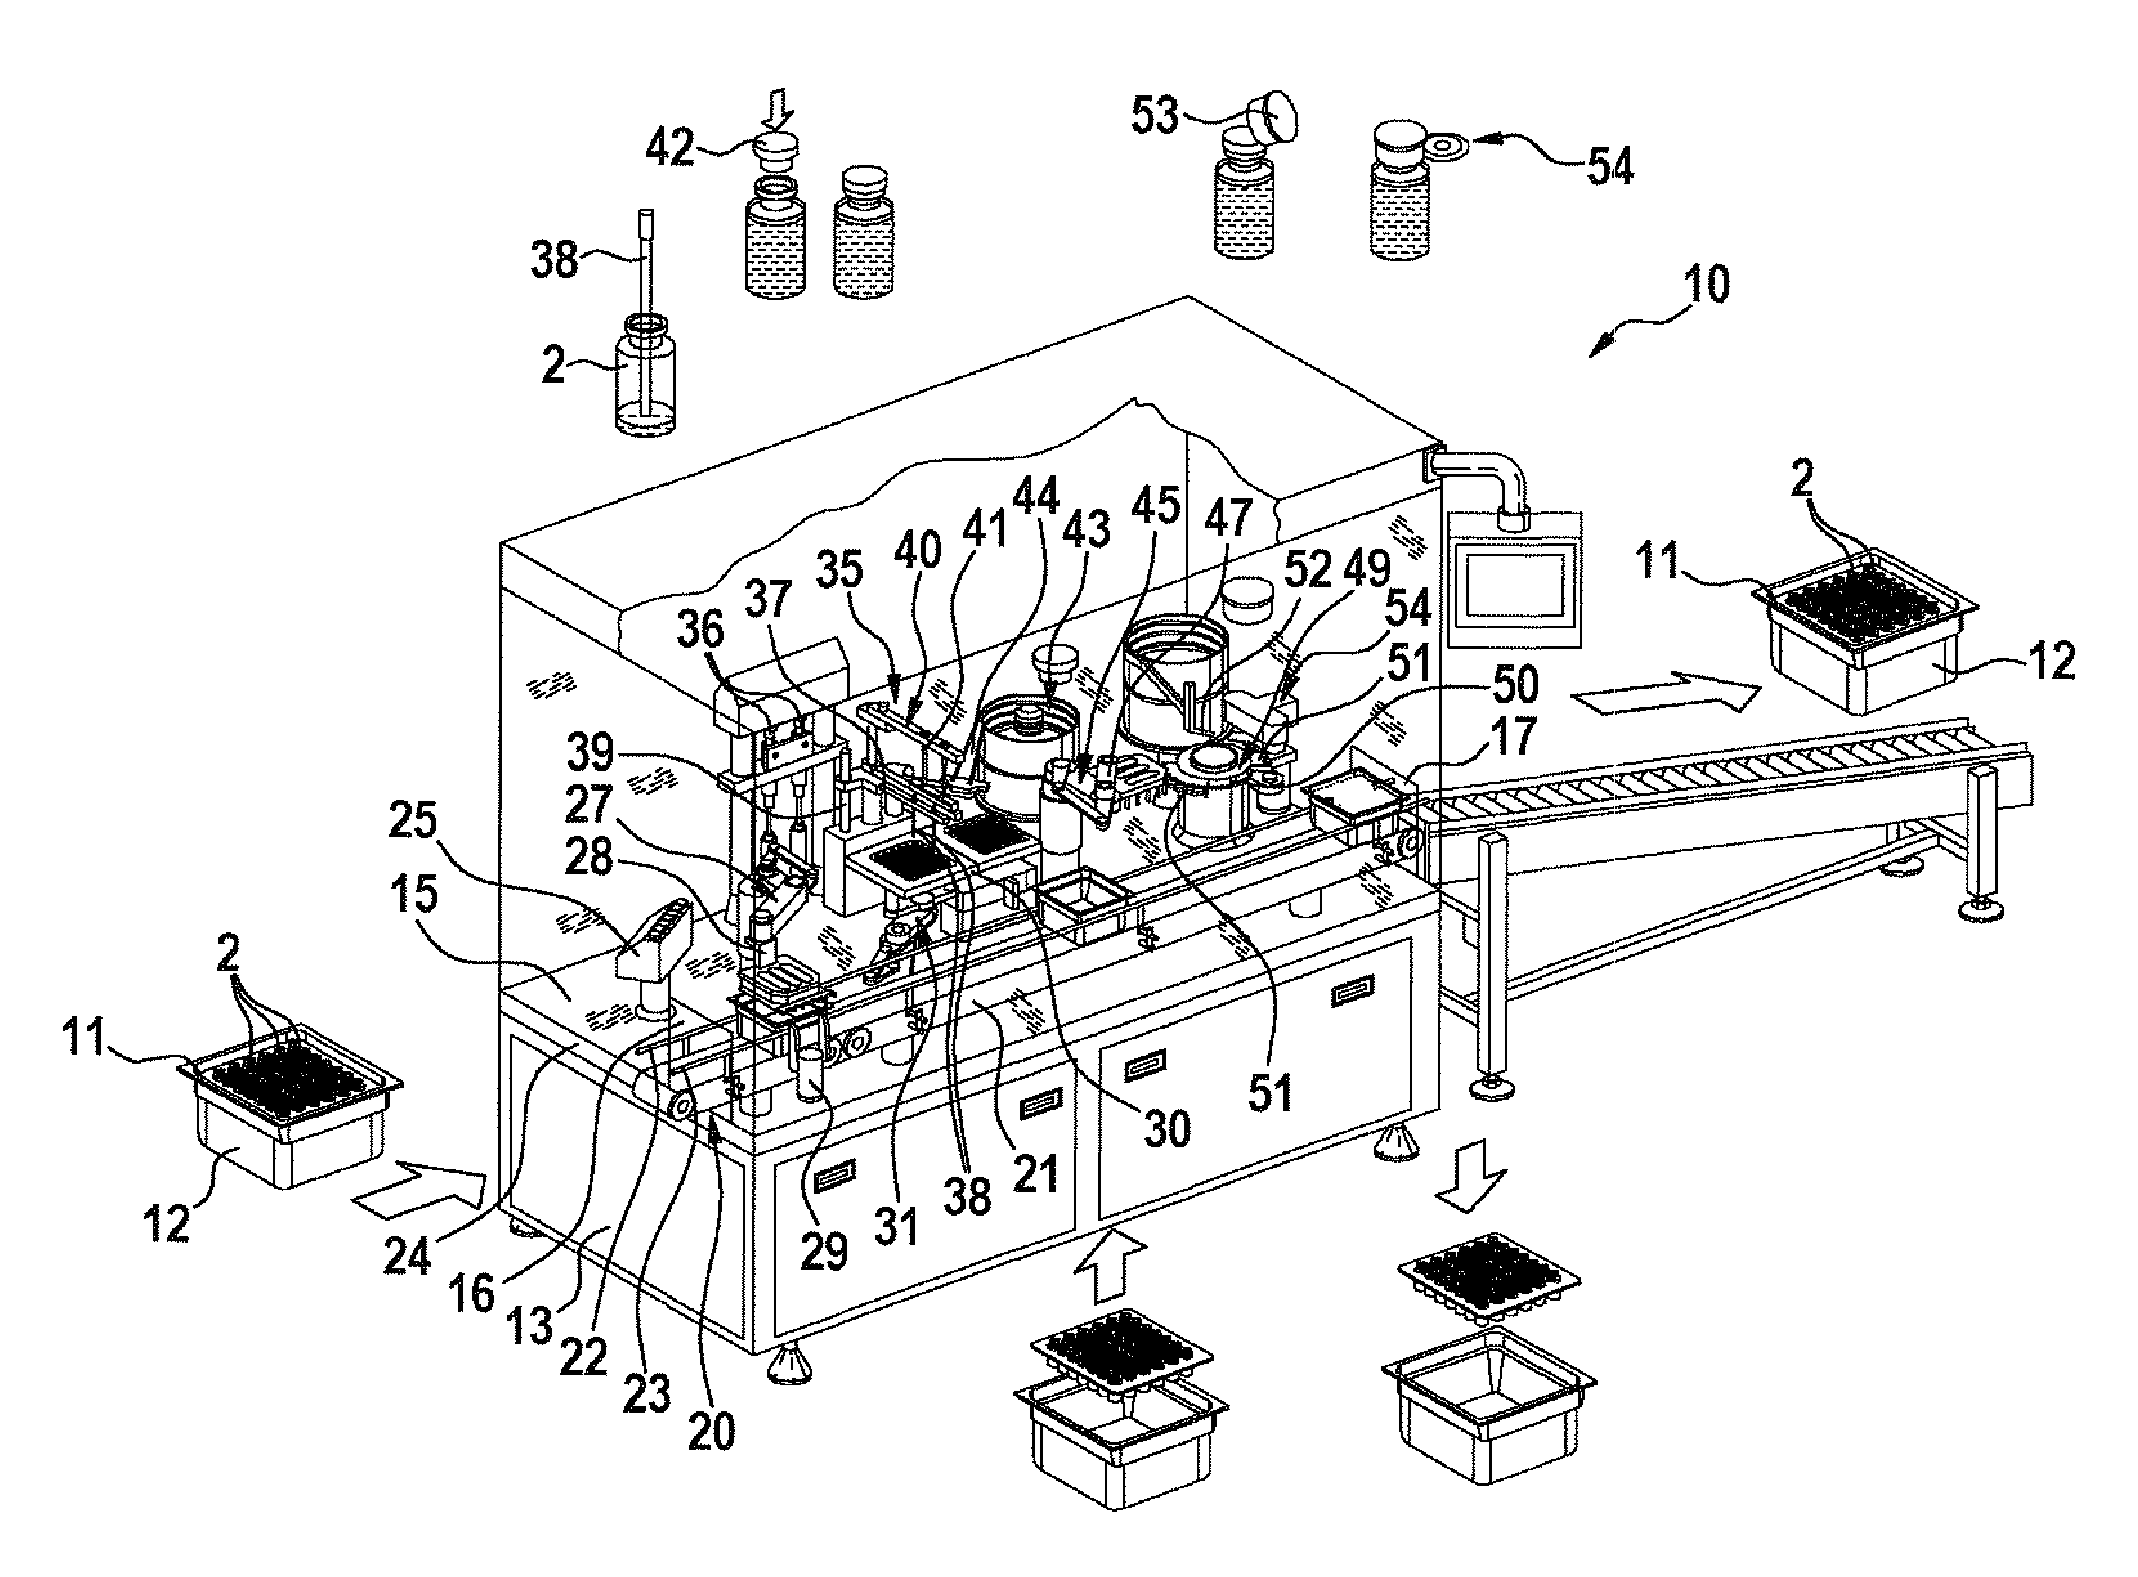 Device for filling and sealing pharmaceutical containers